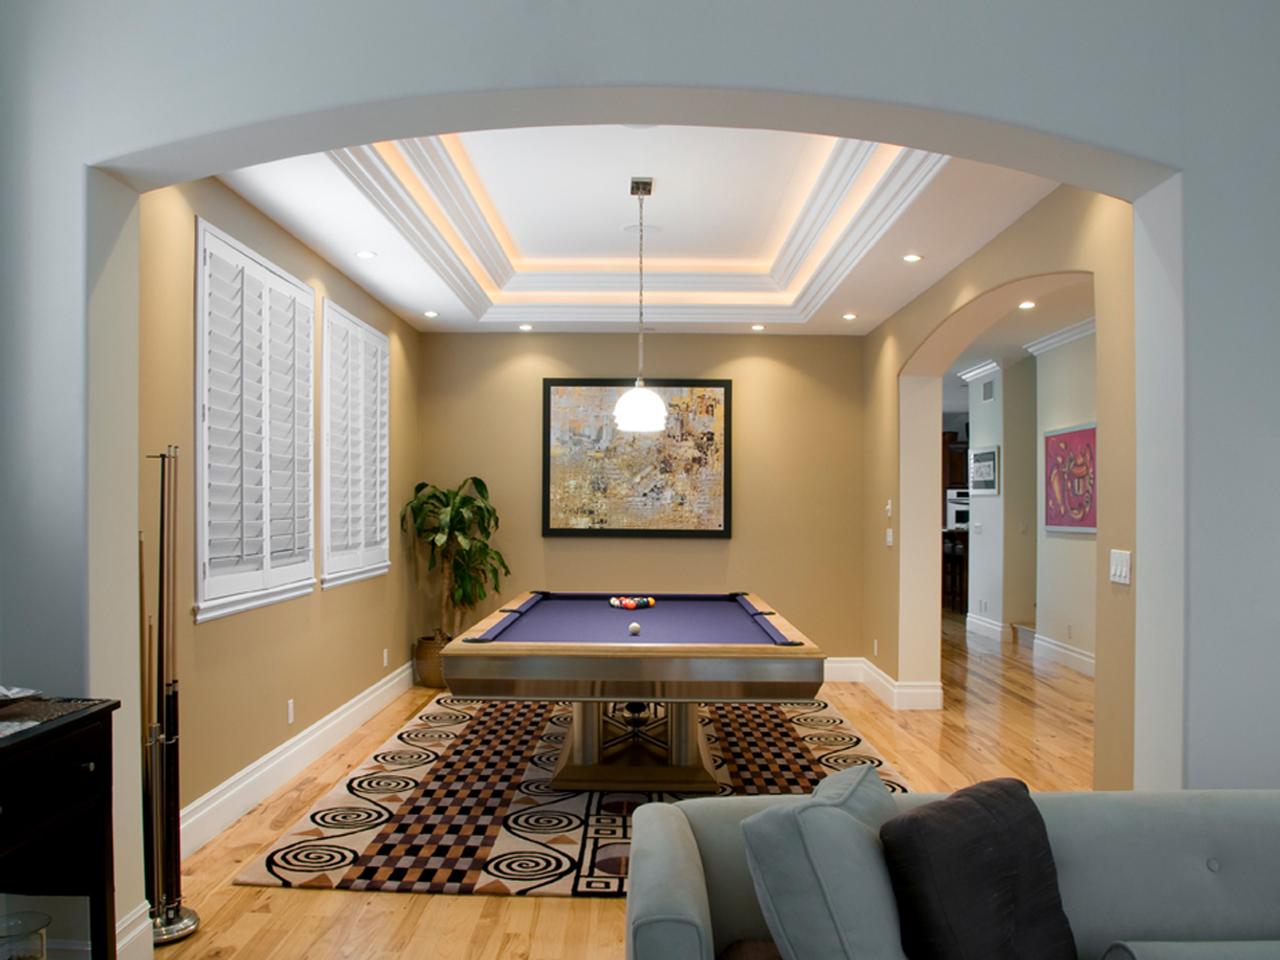 Rec room with pool table with interior shutters on the windows